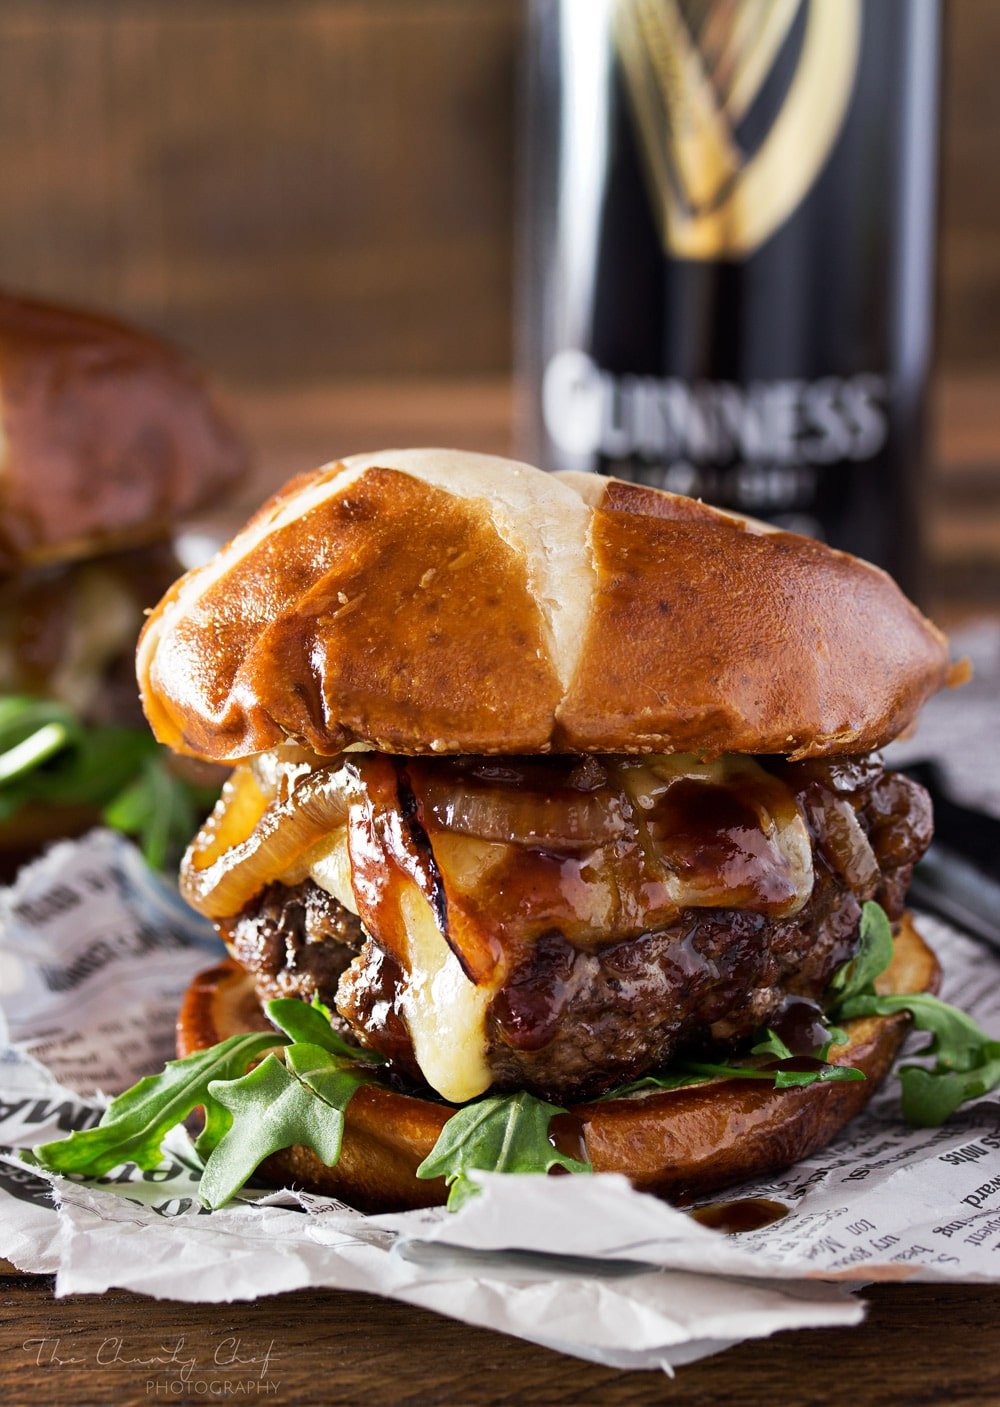 Whiskey-Glazed-Blue-Cheese-Burgers | These blue cheese burgers are brushed with a homemade whiskey glazed, topped with Irish cheese, and smothered in Guinness caramelized onions! | http://thechunkychef.com